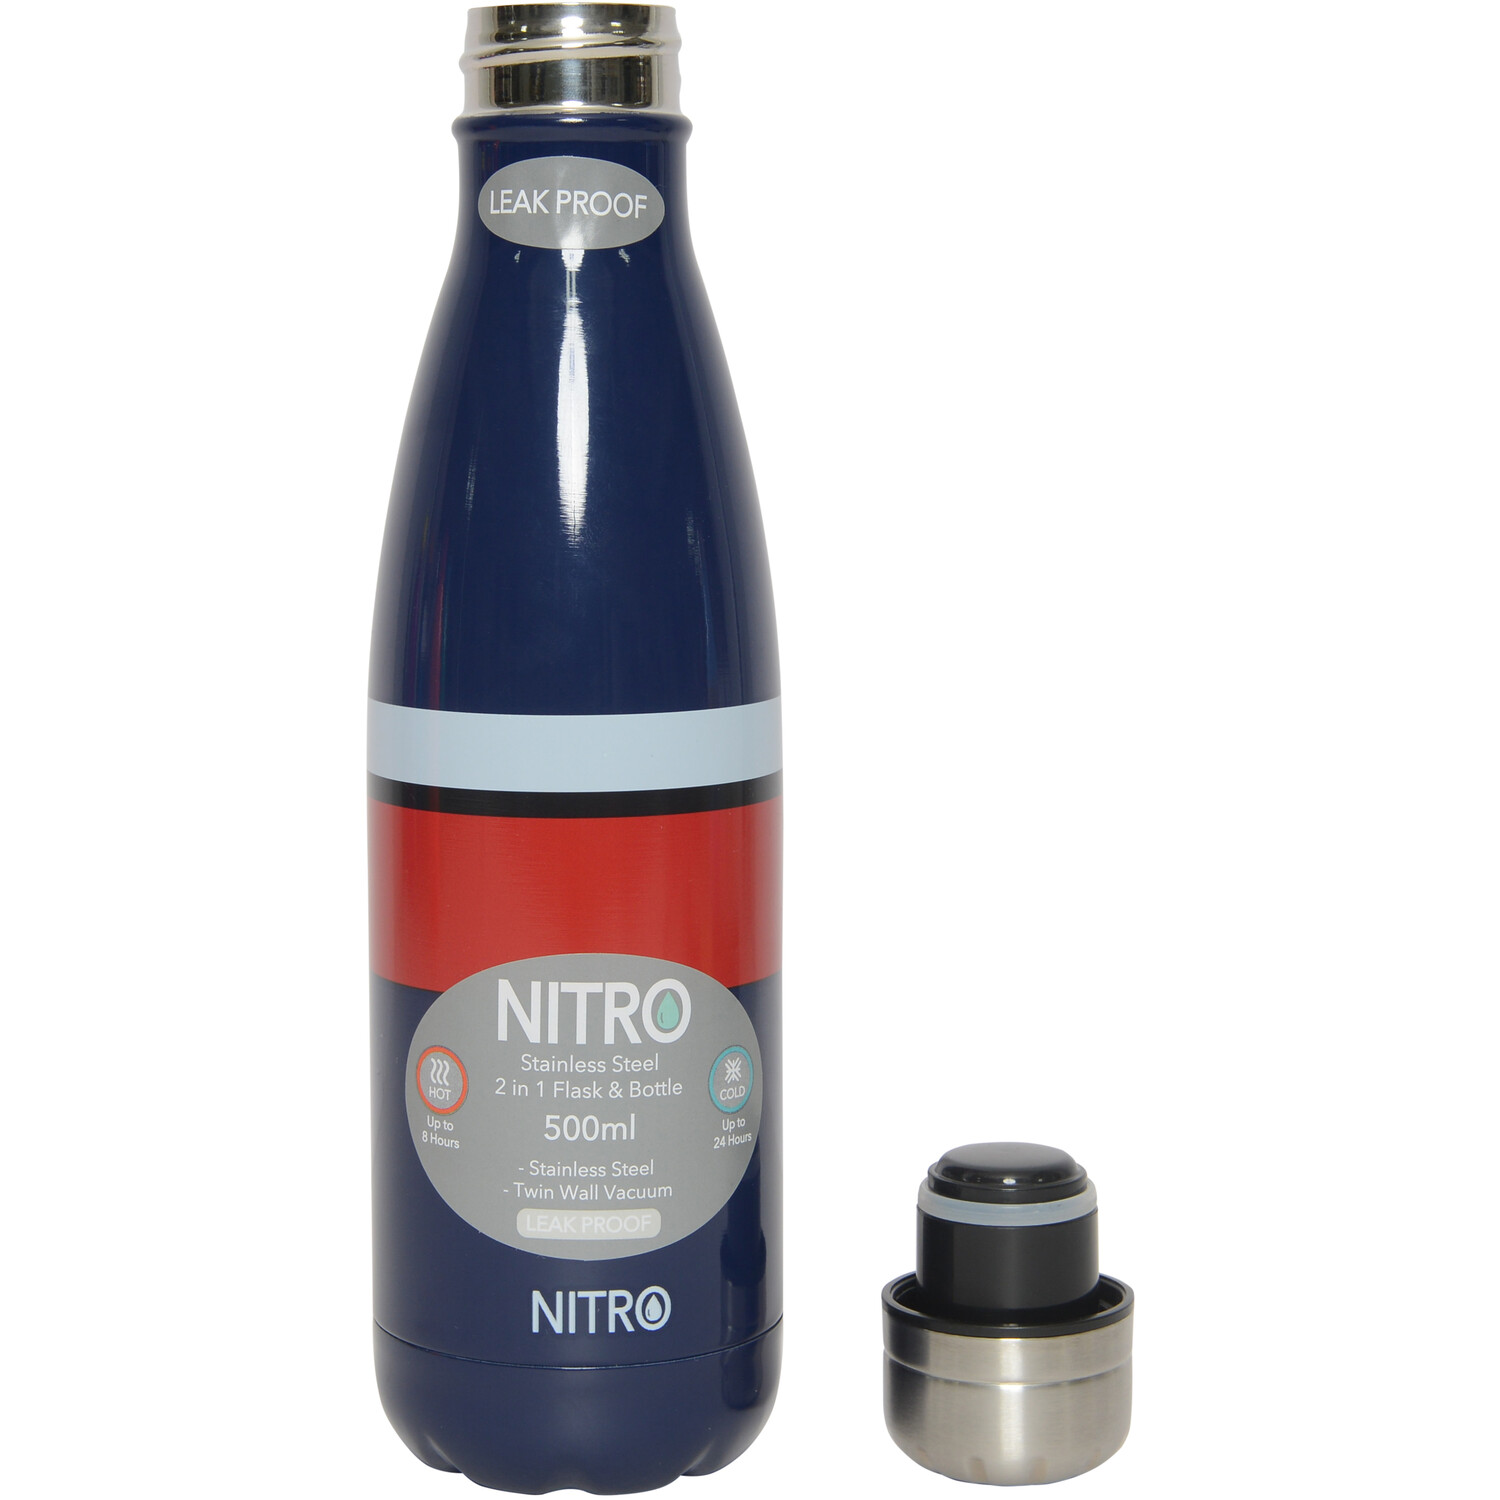 Striped Nitro Stainless Steel Bottle and Flask Image 2